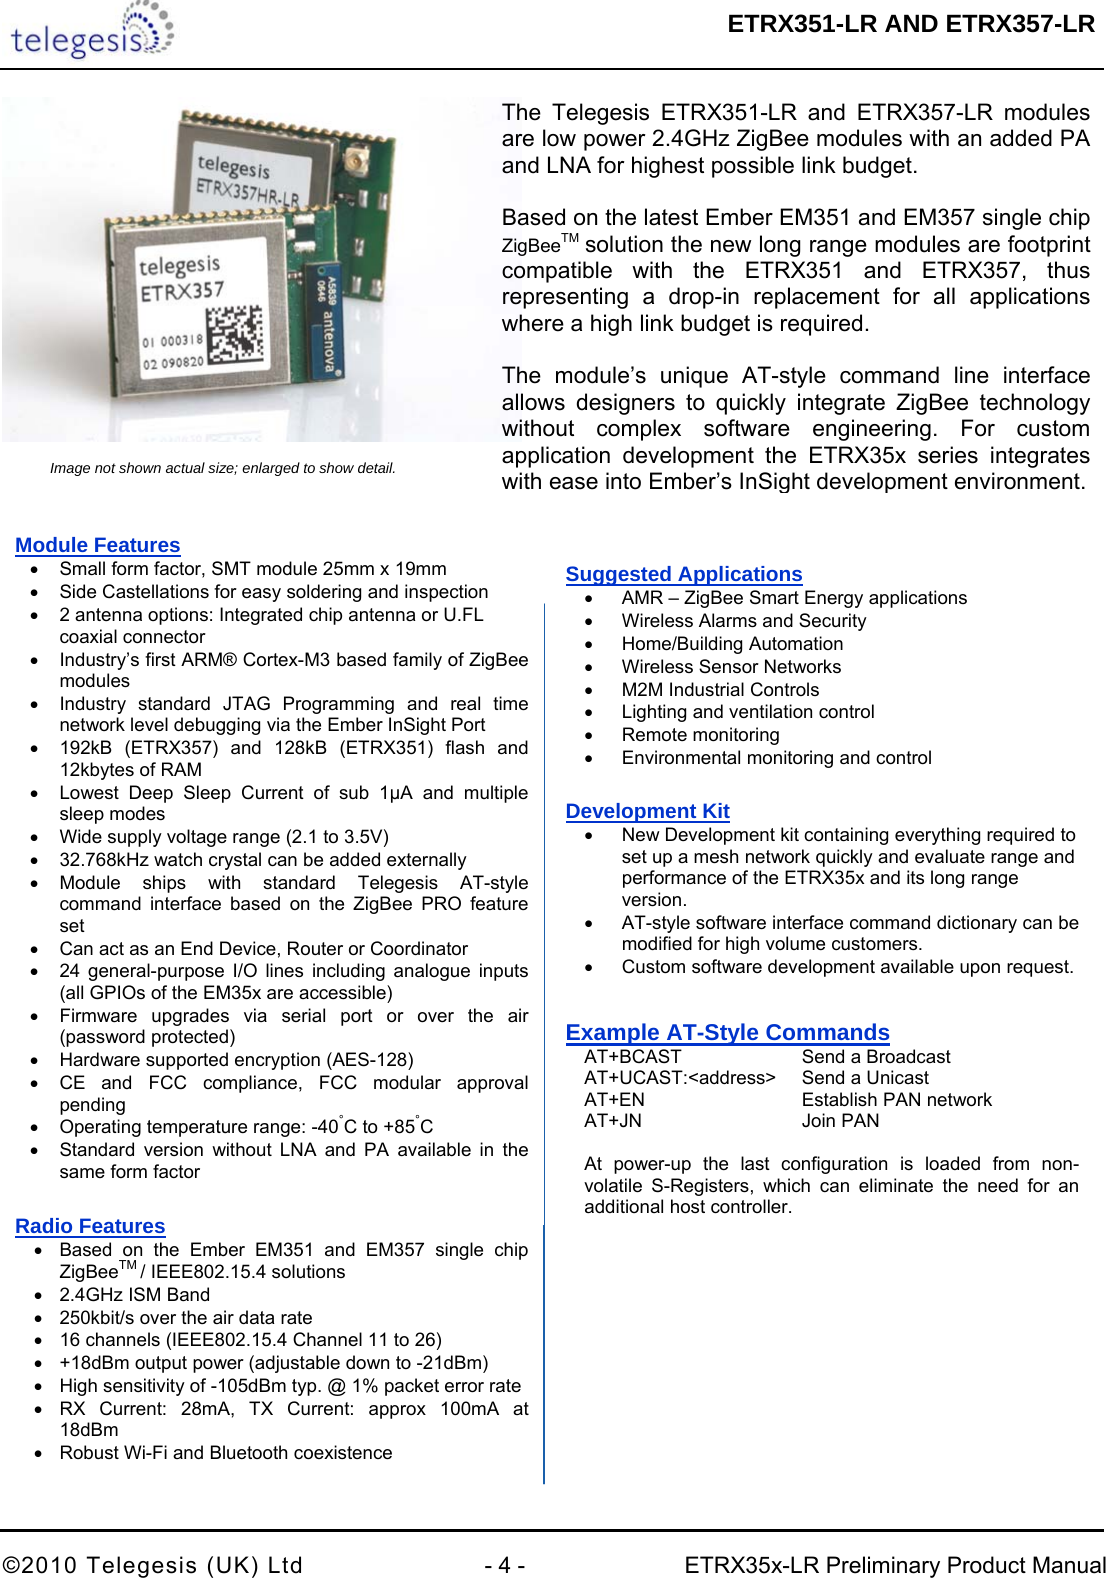  ETRX351-LR AND ETRX357-LR  ©2010 Telegesis (UK) Ltd  - 4 -  ETRX35x-LR Preliminary Product Manual     The Telegesis ETRX351-LR and ETRX357-LR modules are low power 2.4GHz ZigBee modules with an added PA and LNA for highest possible link budget.   Based on the latest Ember EM351 and EM357 single chip ZigBeeTM solution the new long range modules are footprint compatible with the ETRX351 and ETRX357, thus representing a drop-in replacement for all applications where a high link budget is required.  The module’s unique AT-style command line interface allows designers to quickly integrate ZigBee technology without complex software engineering. For custom application development the ETRX35x series integrates with ease into Ember’s InSight development environment.Image not shown actual size; enlarged to show detail. Module Features •  Small form factor, SMT module 25mm x 19mm •  Side Castellations for easy soldering and inspection •  2 antenna options: Integrated chip antenna or U.FL coaxial connector •  Industry’s first ARM® Cortex-M3 based family of ZigBee modules •  Industry standard JTAG Programming and real time network level debugging via the Ember InSight Port •  192kB (ETRX357) and 128kB (ETRX351) flash and 12kbytes of RAM •  Lowest Deep Sleep Current of sub 1µA and multiple sleep modes •  Wide supply voltage range (2.1 to 3.5V) •  32.768kHz watch crystal can be added externally • Module ships with standard Telegesis AT-style command interface based on the ZigBee PRO feature set •  Can act as an End Device, Router or Coordinator •  24 general-purpose I/O lines including analogue inputs (all GPIOs of the EM35x are accessible) •  Firmware upgrades via serial port or over the air (password protected) •  Hardware supported encryption (AES-128) •  CE and FCC compliance, FCC modular approval pending •  Operating temperature range: -40°C to +85°C •  Standard version without LNA and PA available in the same form factor  Radio Features •  Based on the Ember EM351 and EM357 single chip ZigBeeTM / IEEE802.15.4 solutions •  2.4GHz ISM Band •  250kbit/s over the air data rate •  16 channels (IEEE802.15.4 Channel 11 to 26) •  +18dBm output power (adjustable down to -21dBm) •  High sensitivity of -105dBm typ. @ 1% packet error rate •  RX Current: 28mA, TX Current: approx 100mA at 18dBm •  Robust Wi-Fi and Bluetooth coexistence Suggested Applications •  AMR – ZigBee Smart Energy applications •  Wireless Alarms and Security  • Home/Building Automation •  Wireless Sensor Networks •  M2M Industrial Controls •  Lighting and ventilation control • Remote monitoring •  Environmental monitoring and control Development Kit •  New Development kit containing everything required to set up a mesh network quickly and evaluate range and performance of the ETRX35x and its long range version. •  AT-style software interface command dictionary can be modified for high volume customers. •  Custom software development available upon request. Example AT-Style Commands   AT+BCAST     Send a Broadcast    AT+UCAST:&lt;address&gt;  Send a Unicast   AT+EN       Establish PAN network  AT+JN      Join PAN    At power-up the last configuration is loaded from non- volatile S-Registers, which can eliminate the need for an   additional host controller. 